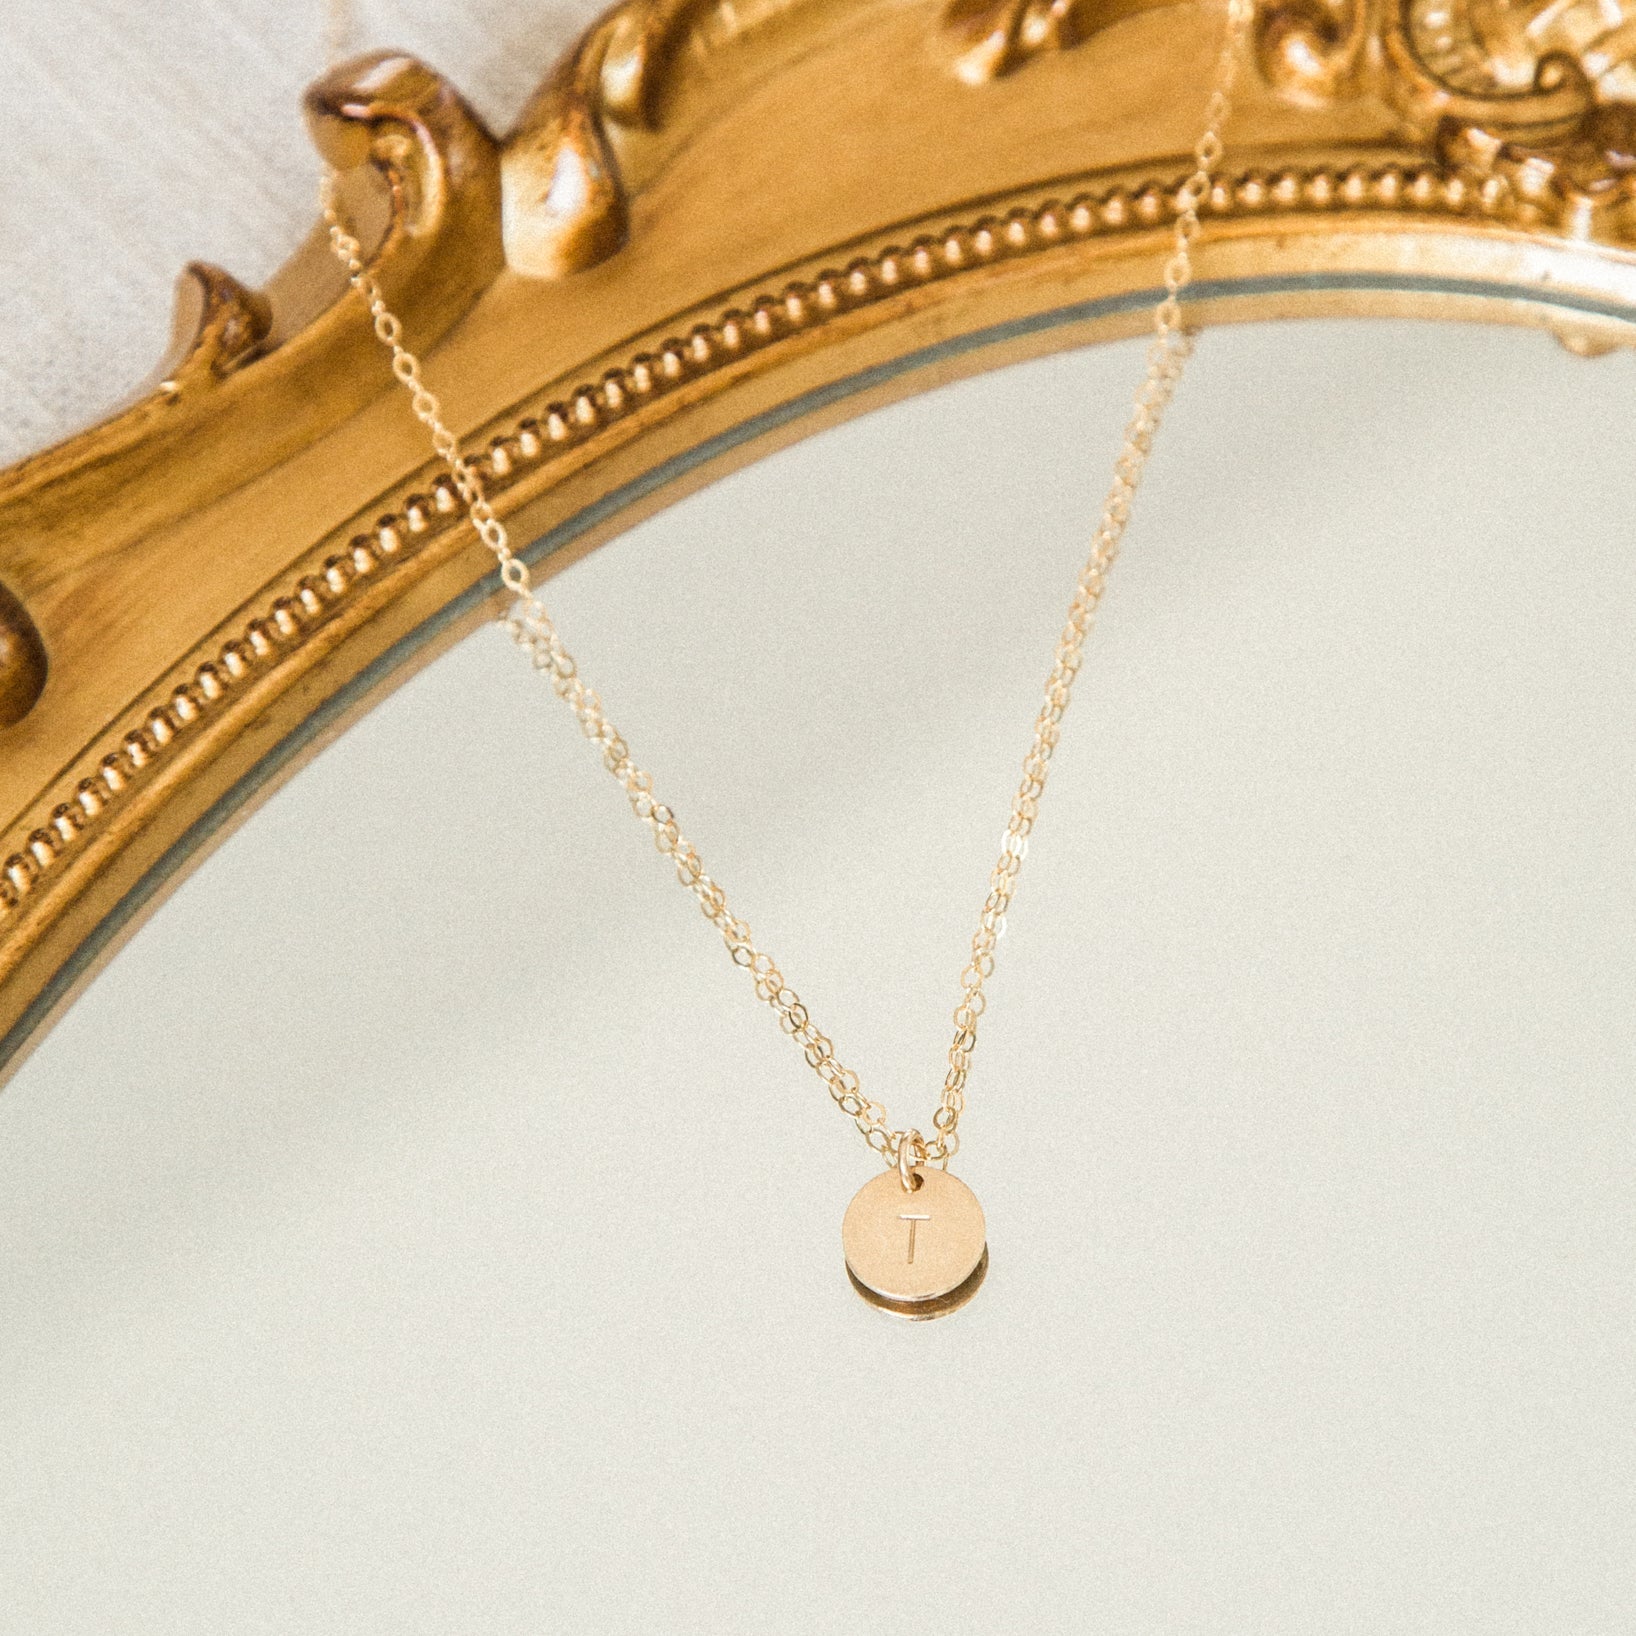 Small Coin Necklace Elizabeth Coin Necklace, Gold Coin Pendant Necklace, Coin  Necklace, Gold Trendy Necklace, Small Medallion GPN00025 -  Canada